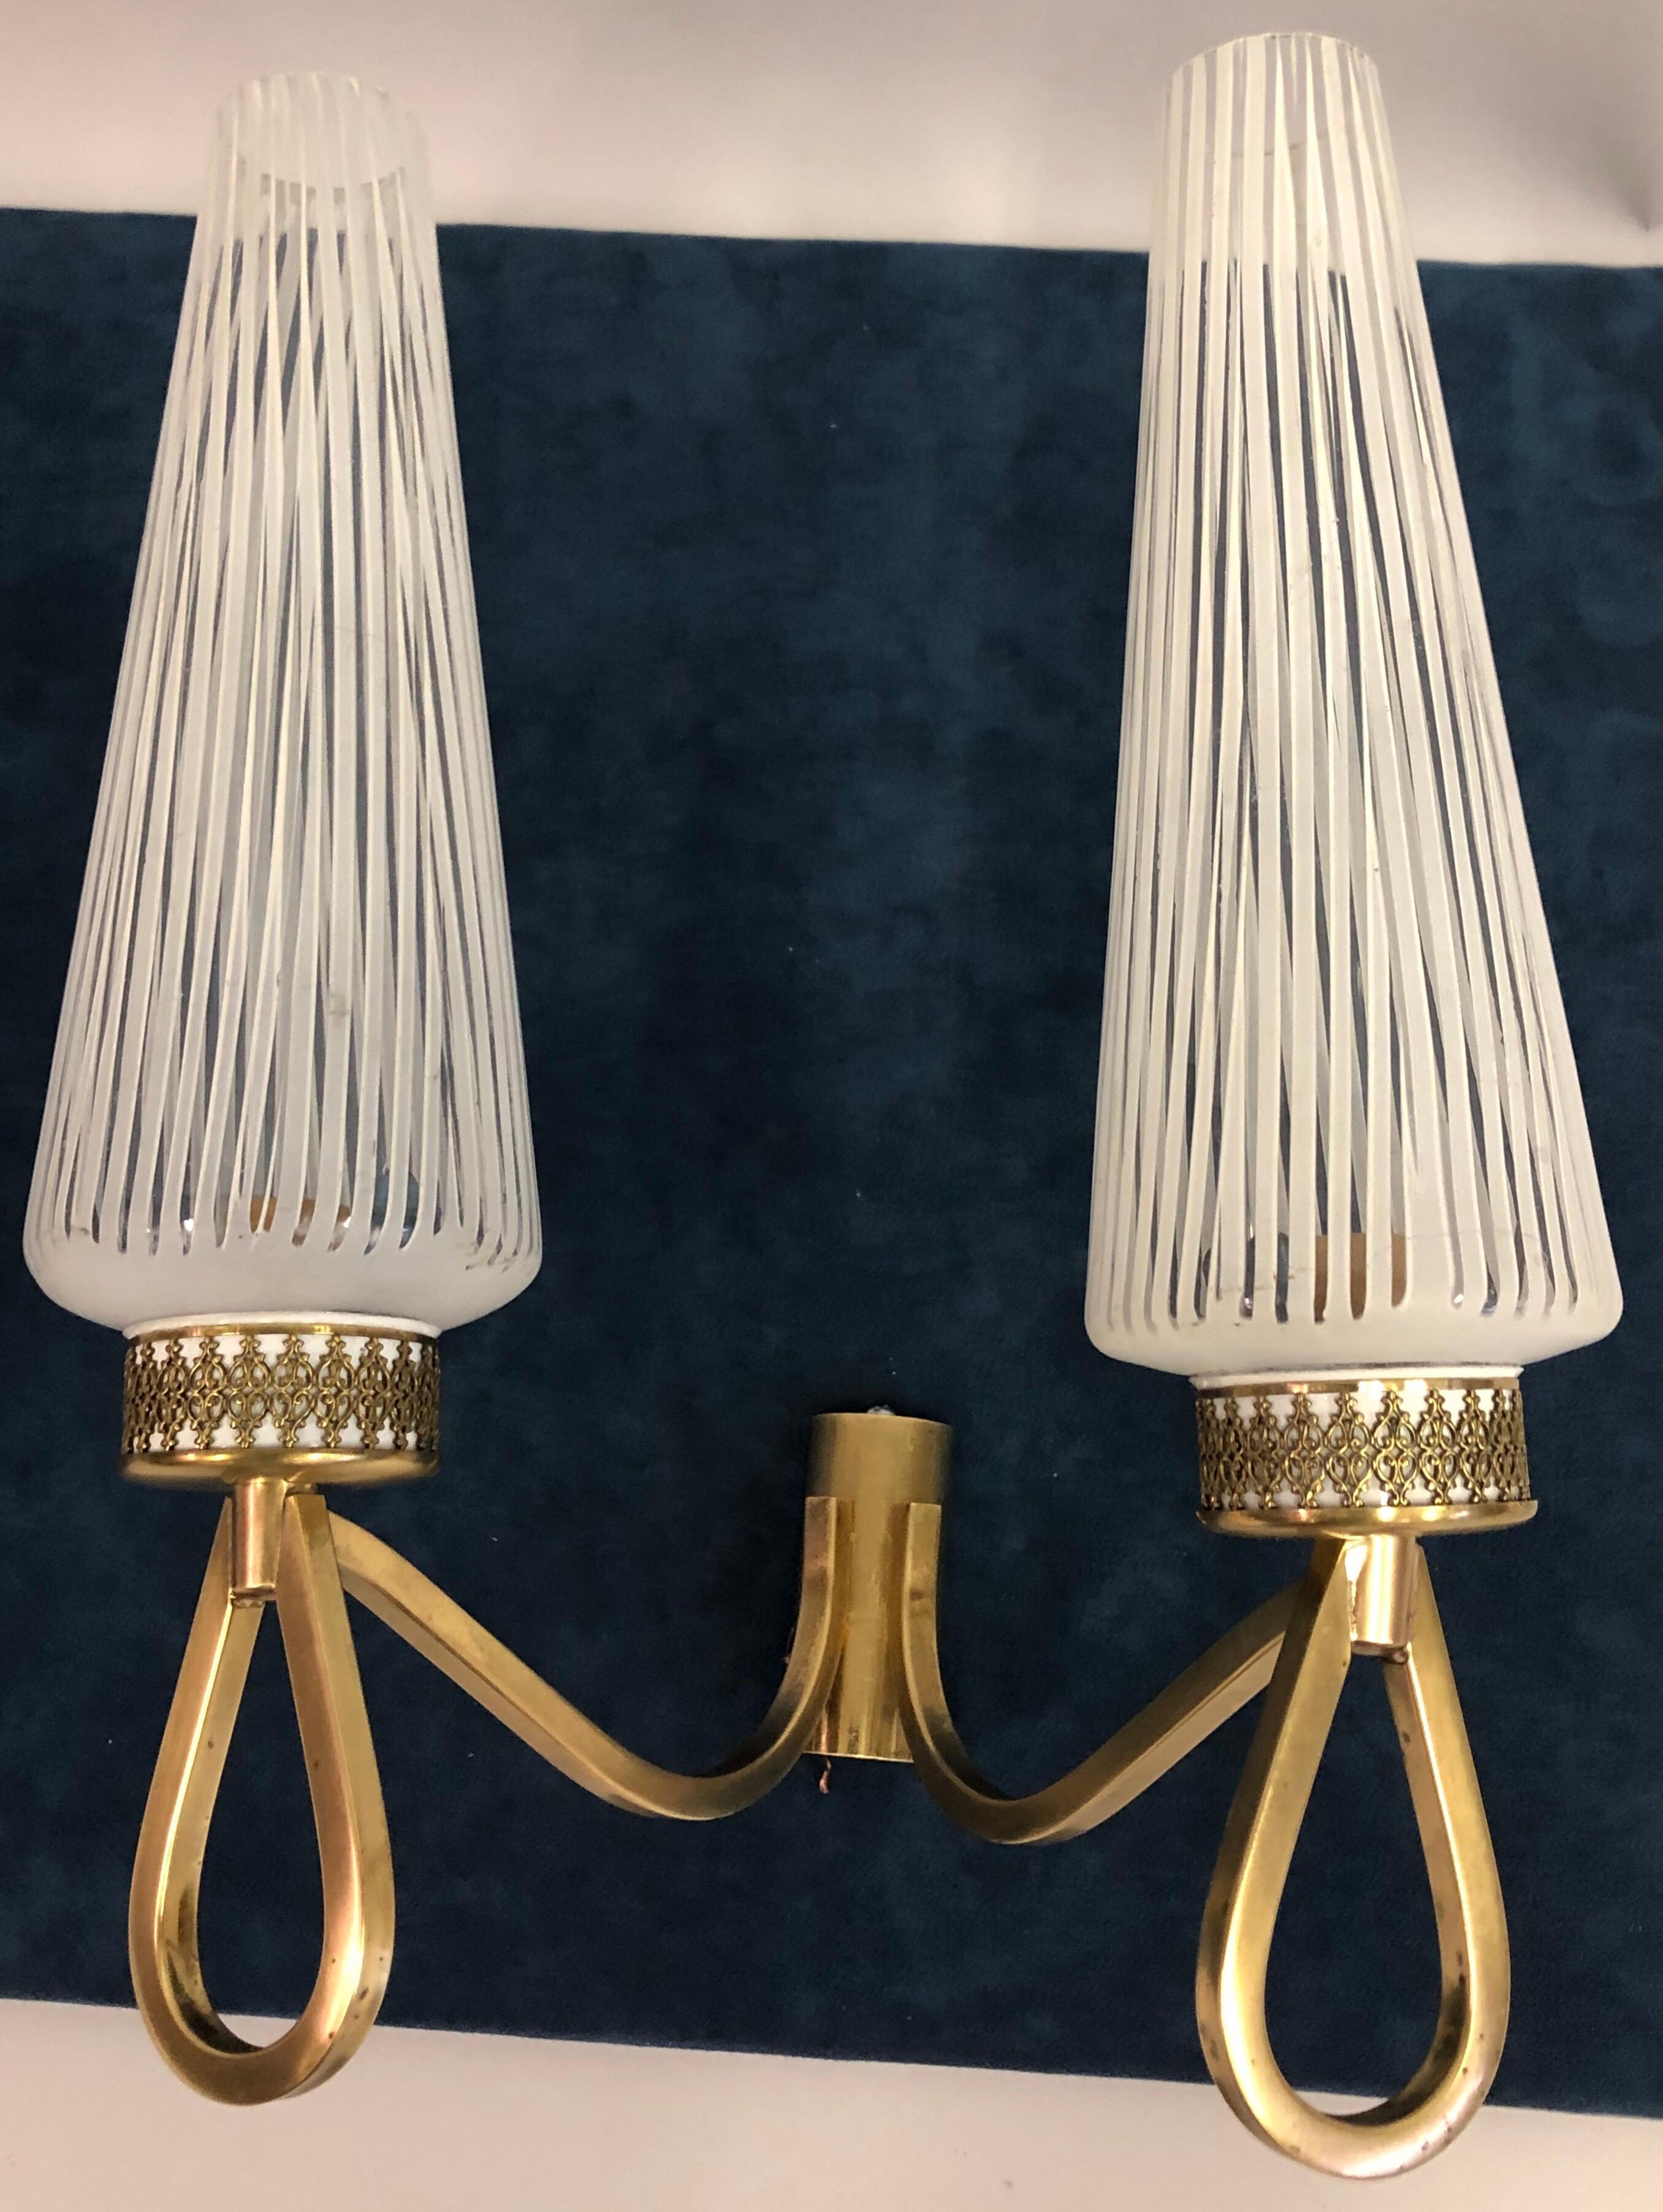 20th Century Pair of Double Arm Italian Midcentury Murano Sconces with Glass by Venini